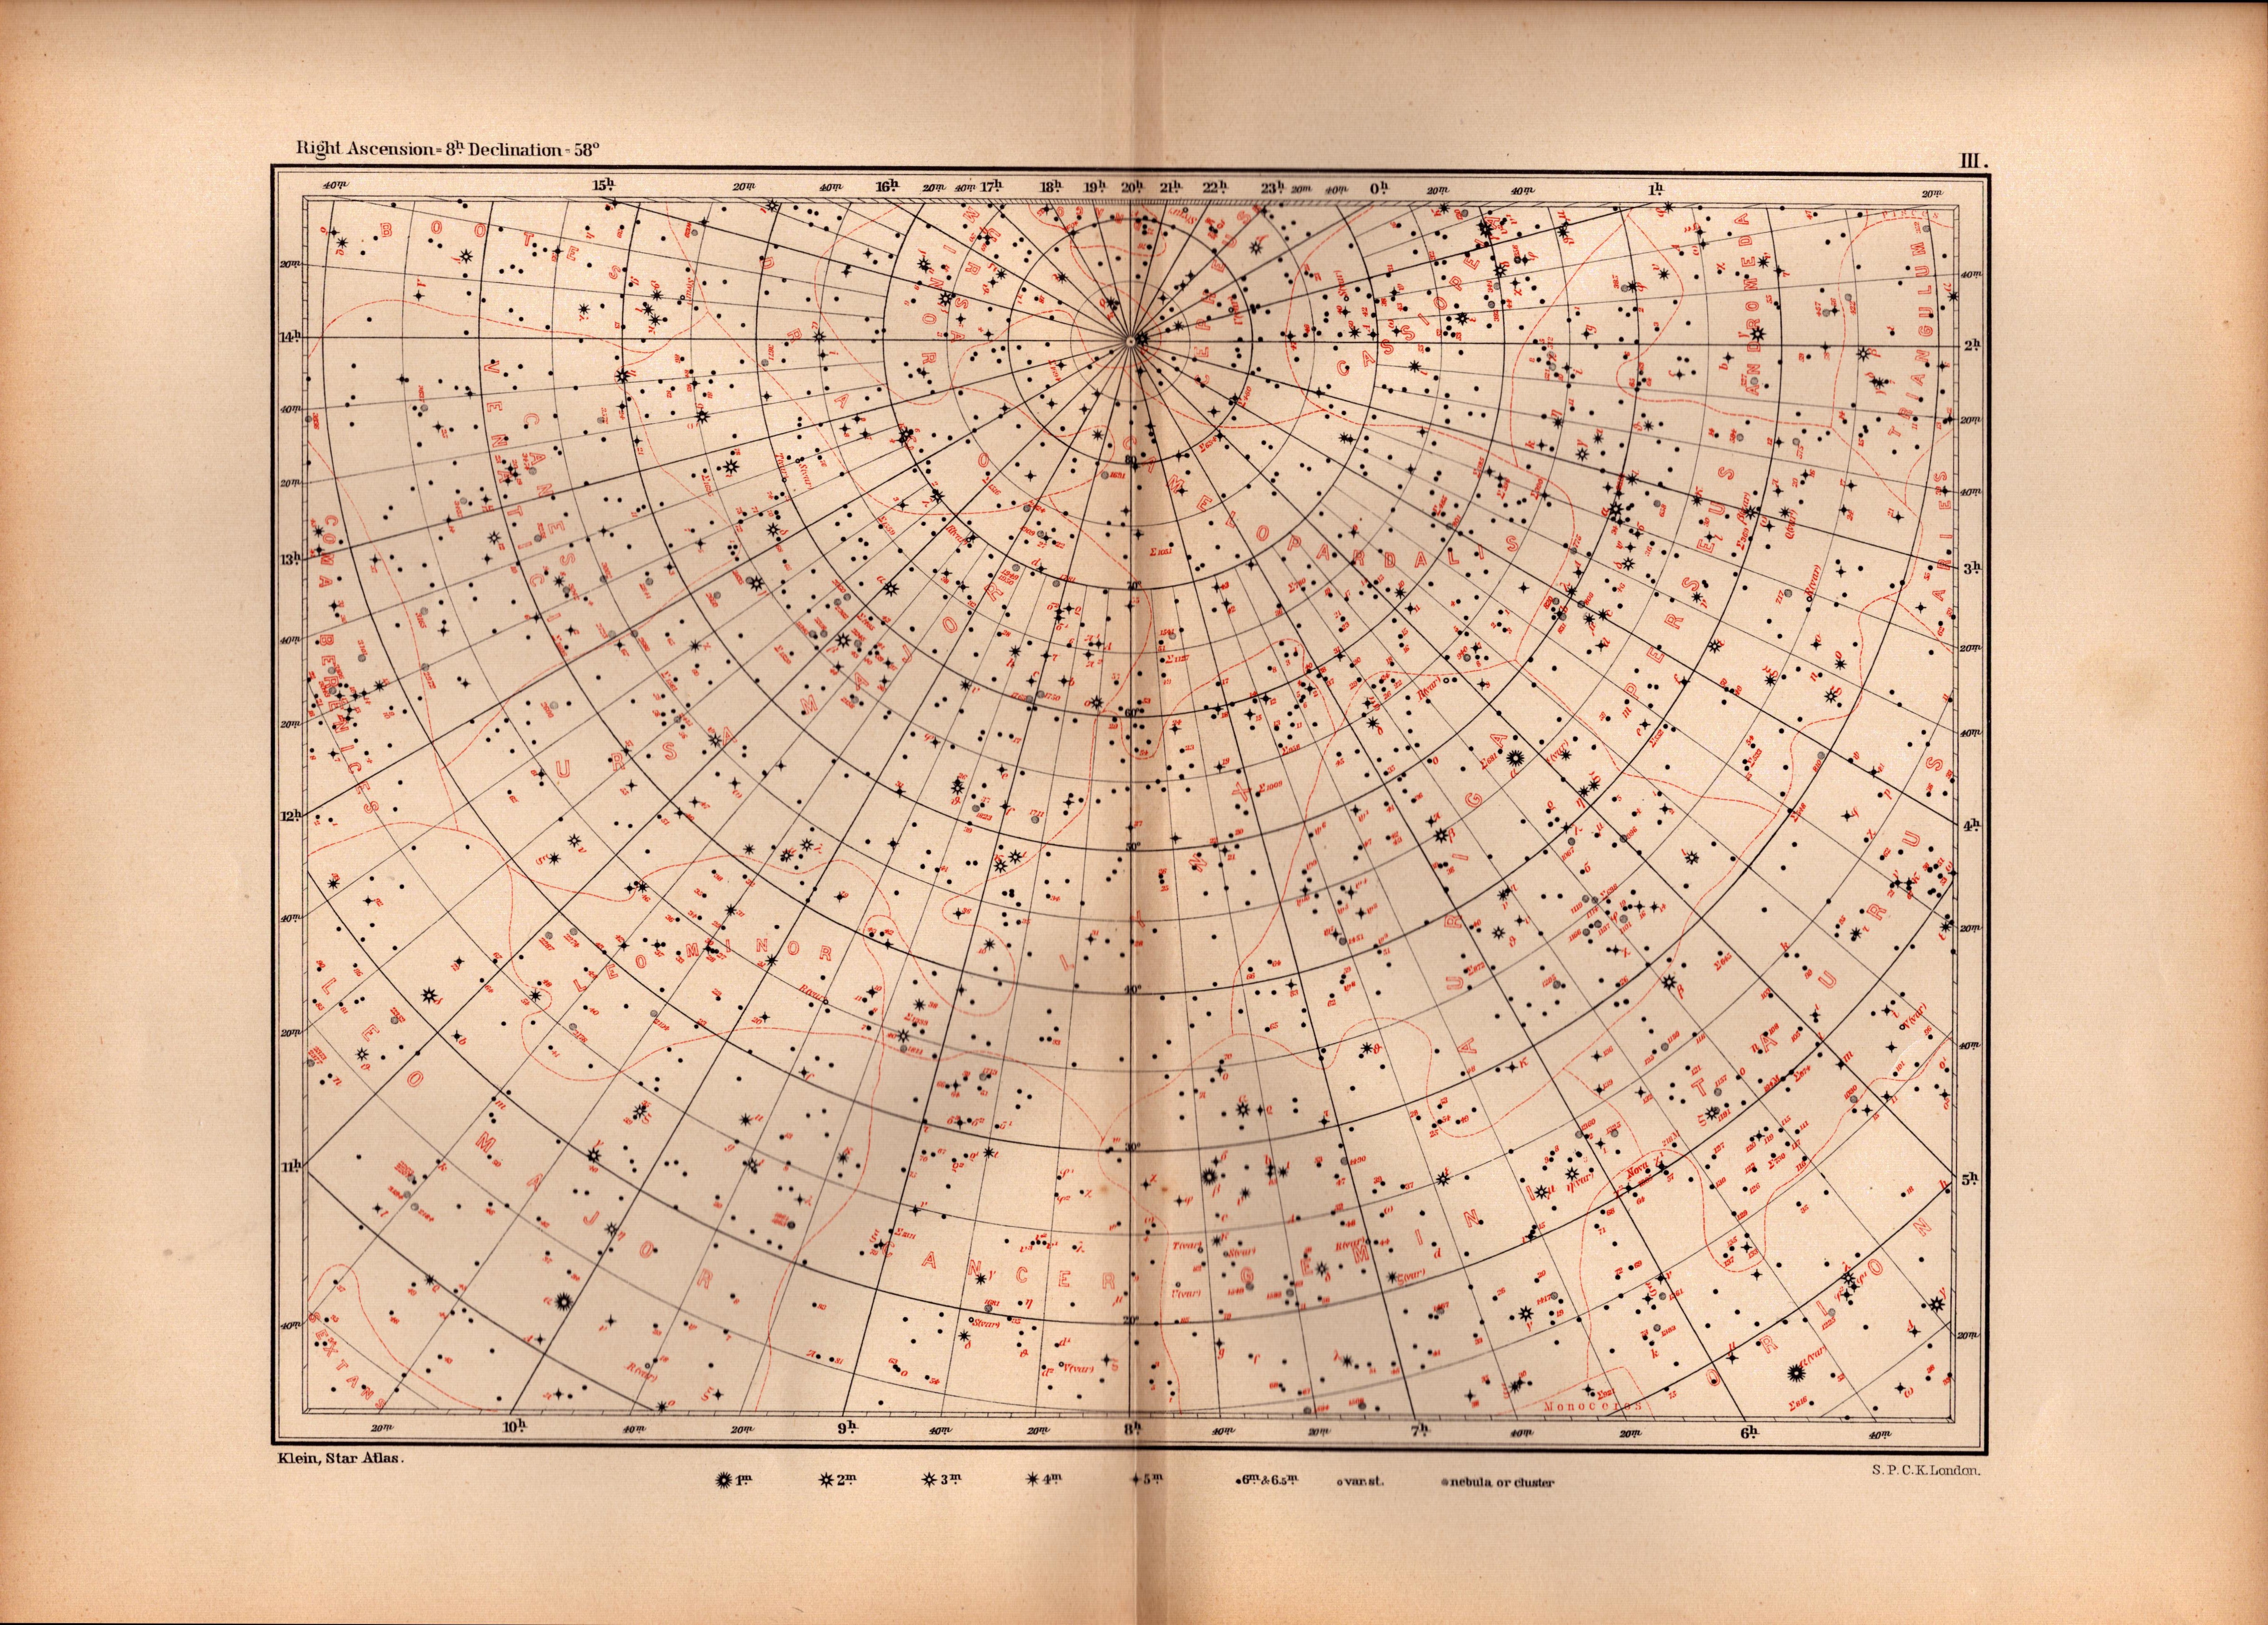 Star Atlas Declination 8 Hr -58 Degrees Astronomy Antique Map.